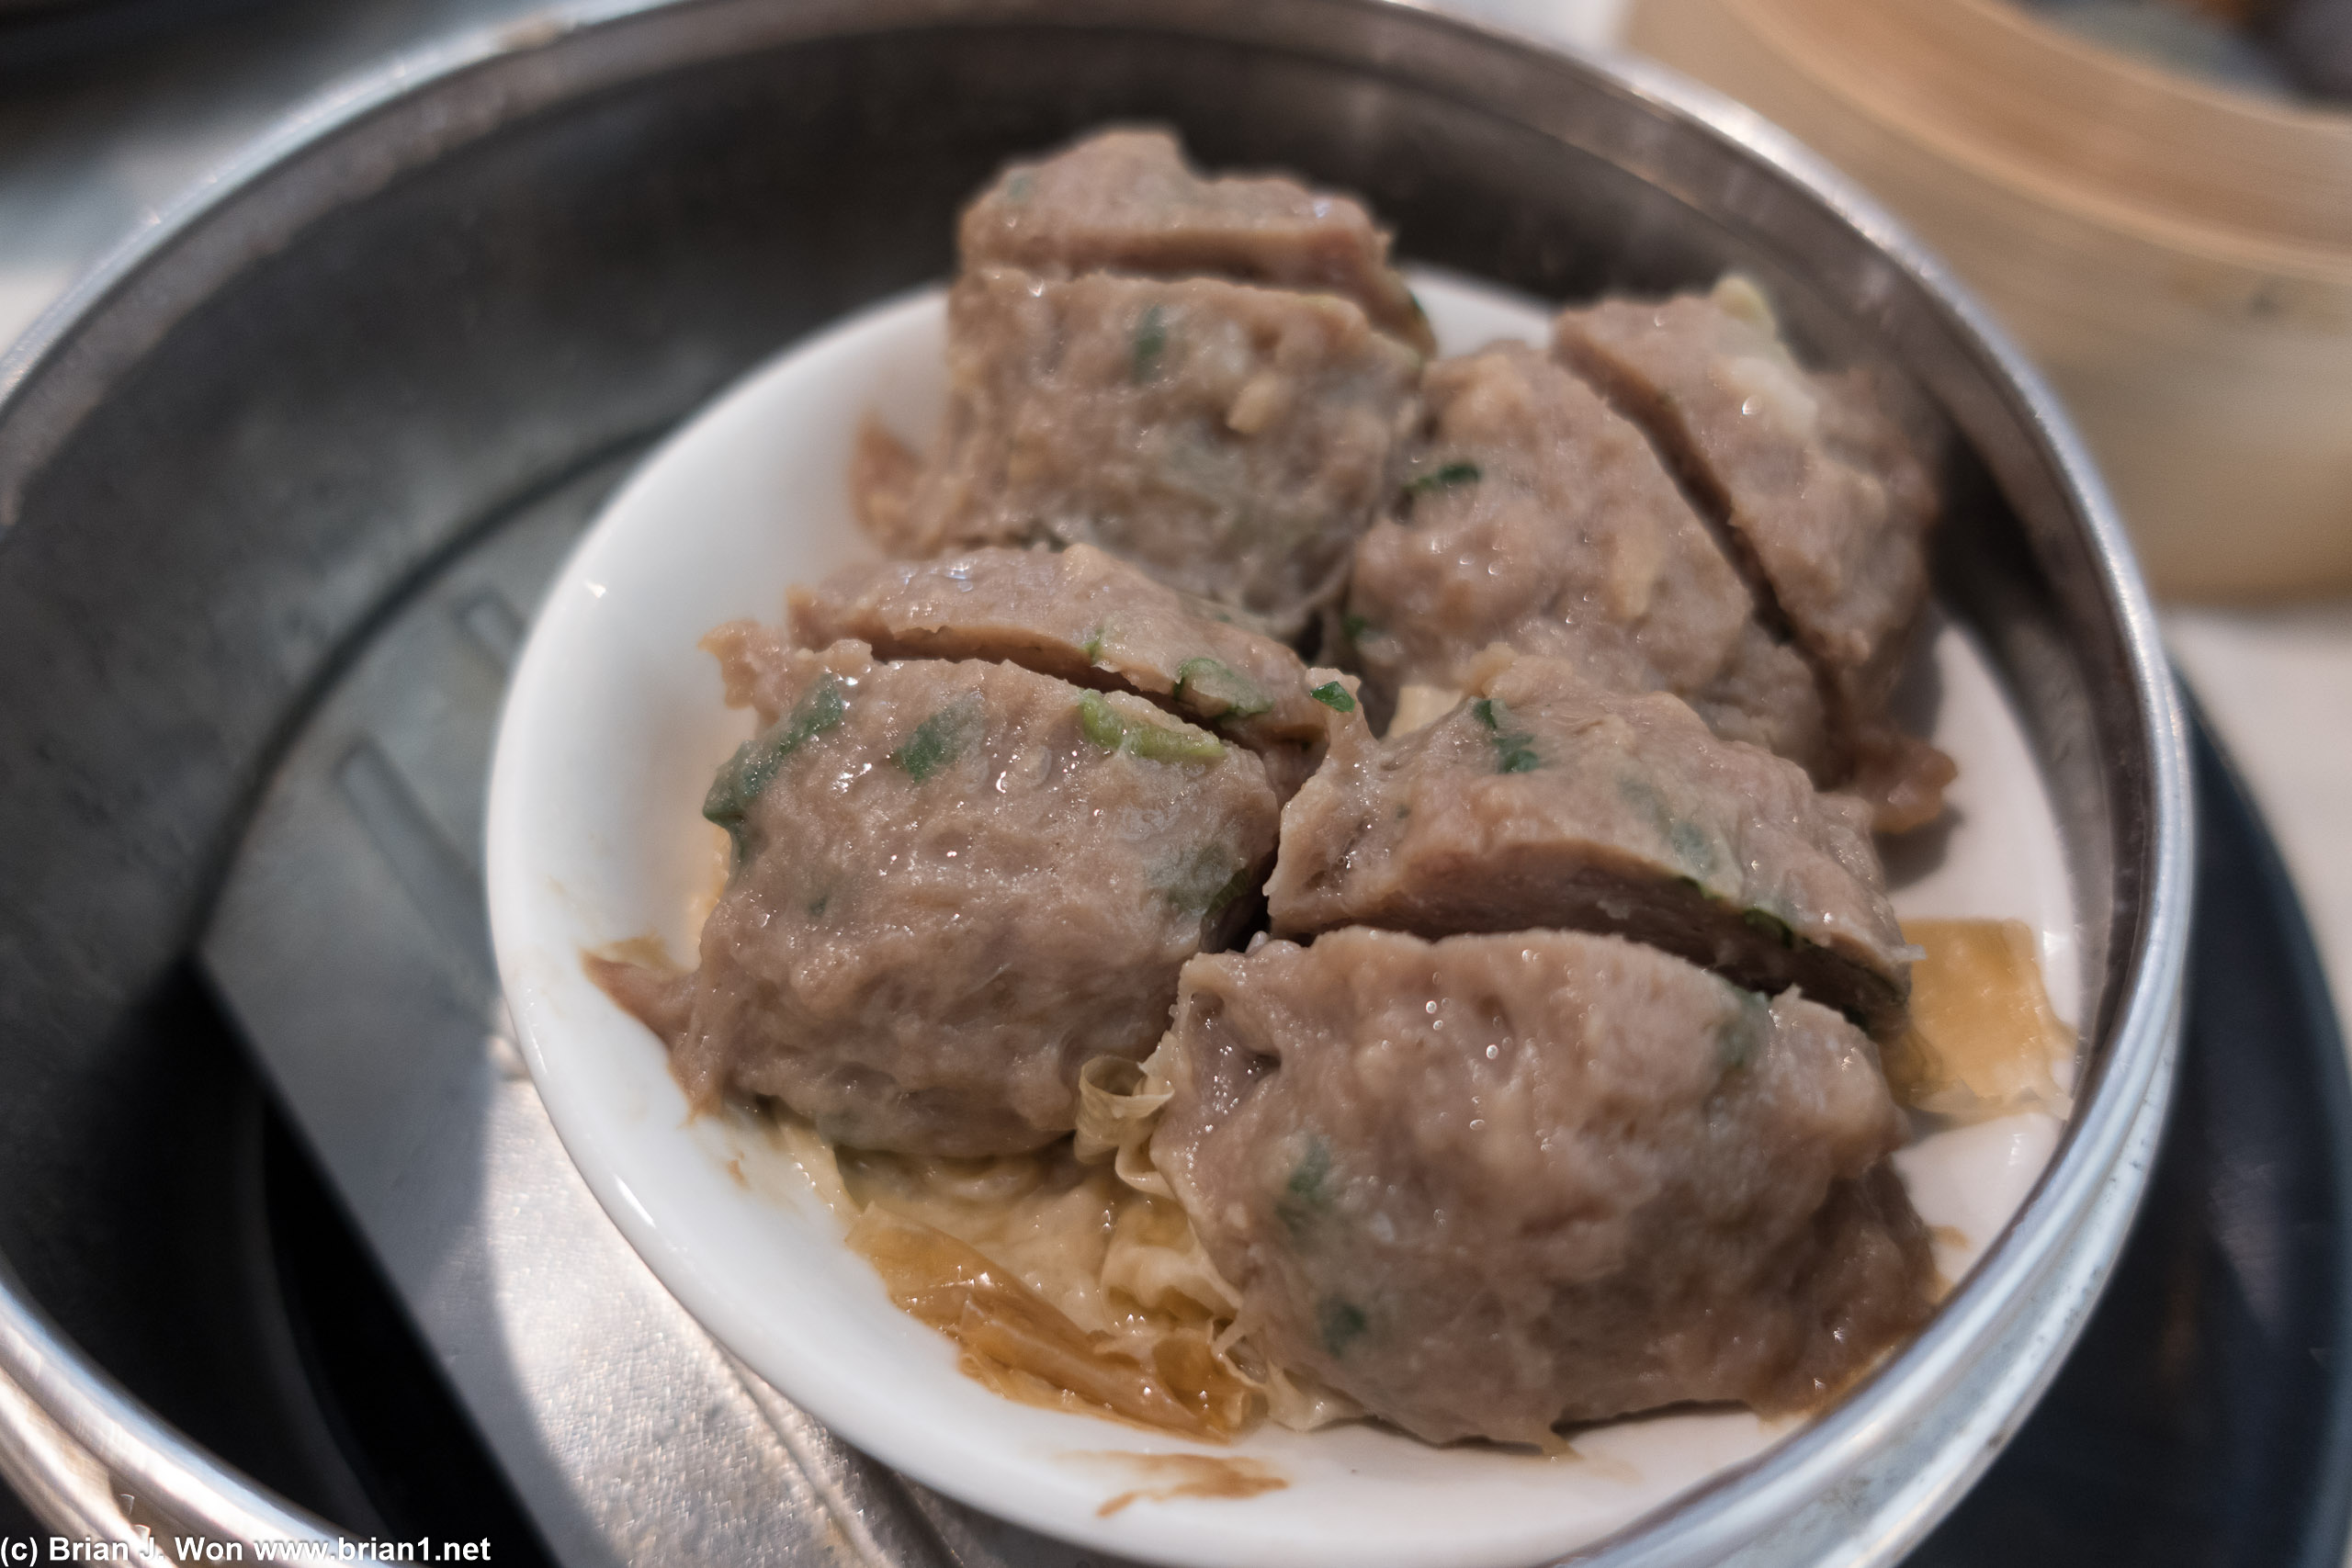 Beef ball were also excellent, small but meaty.